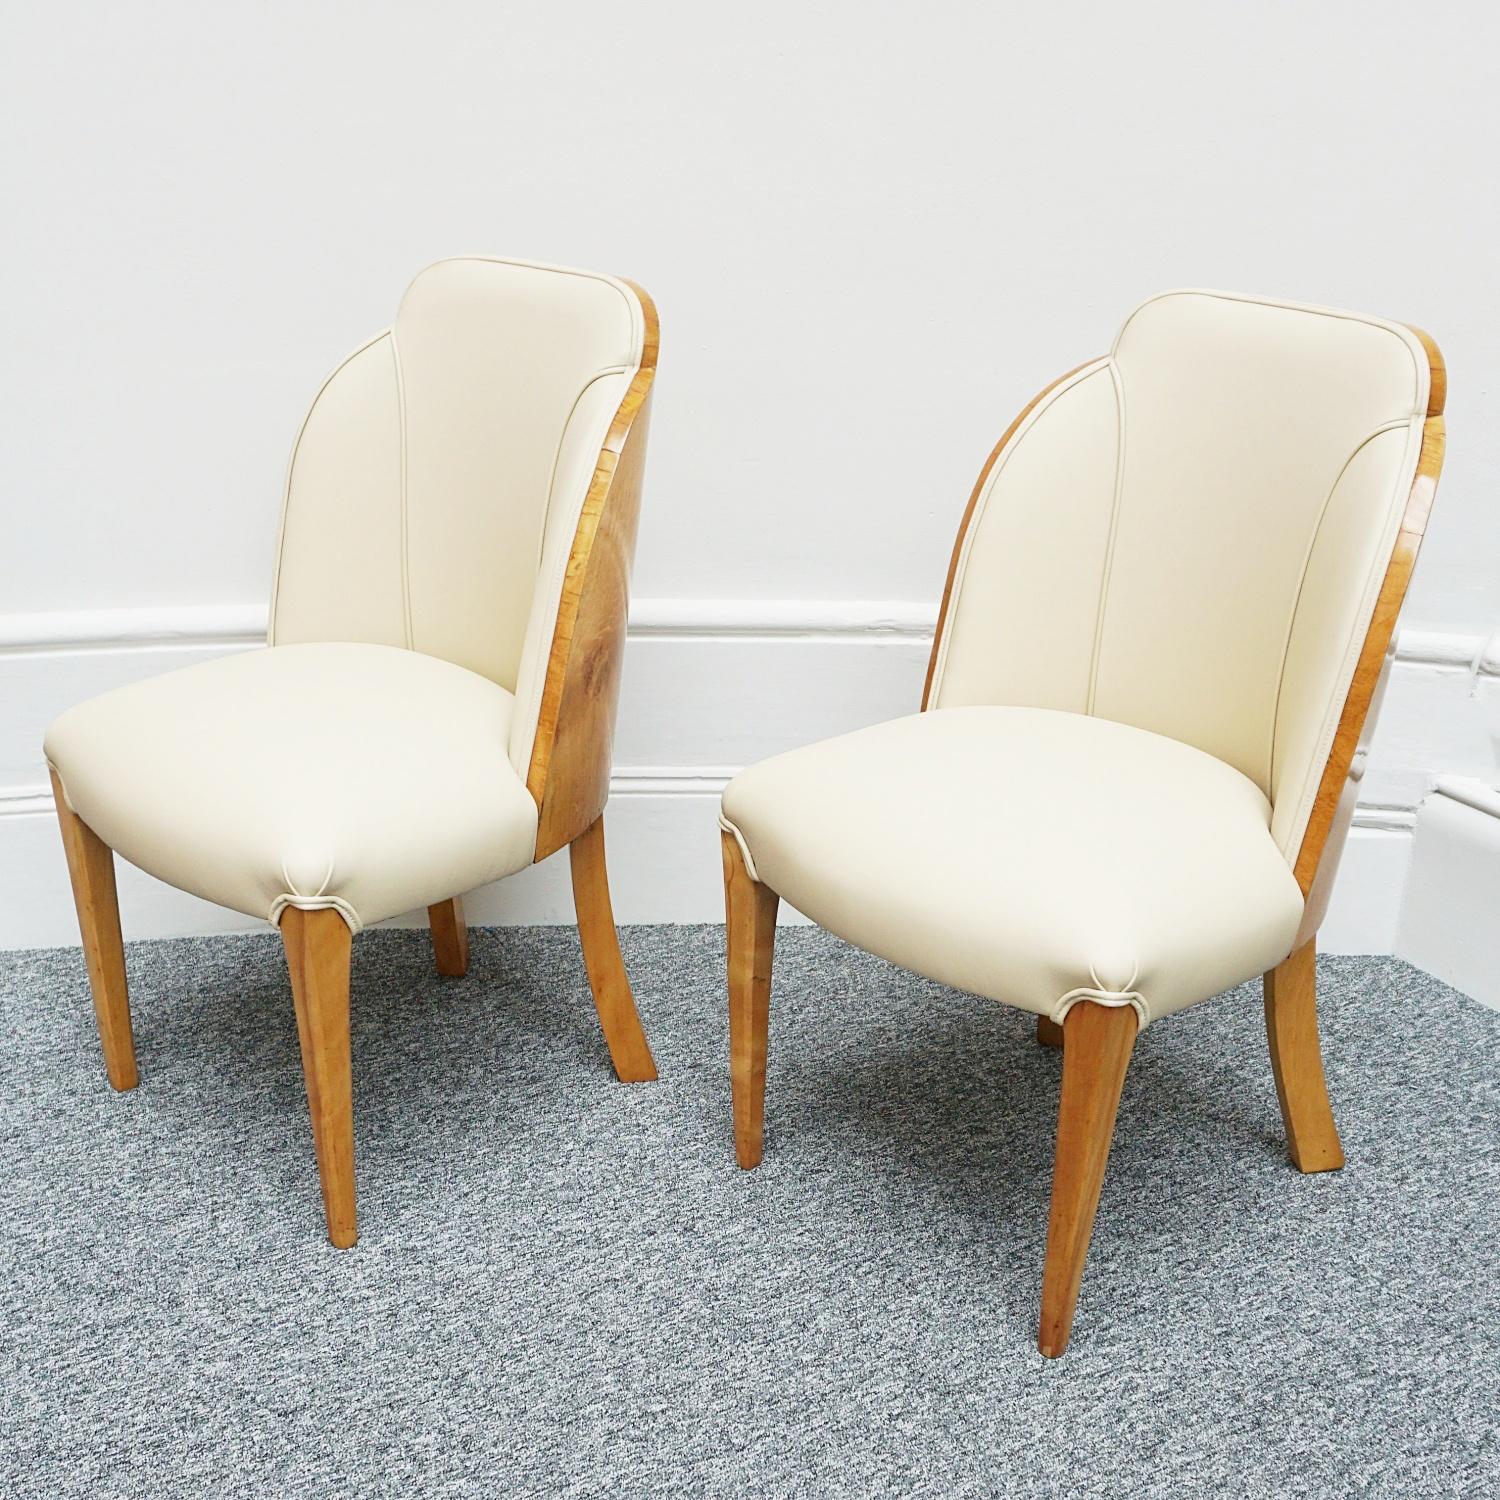 Mid-20th Century Original Pair of Art Deco 1930's Walnut and Cream Leather Side Chairs